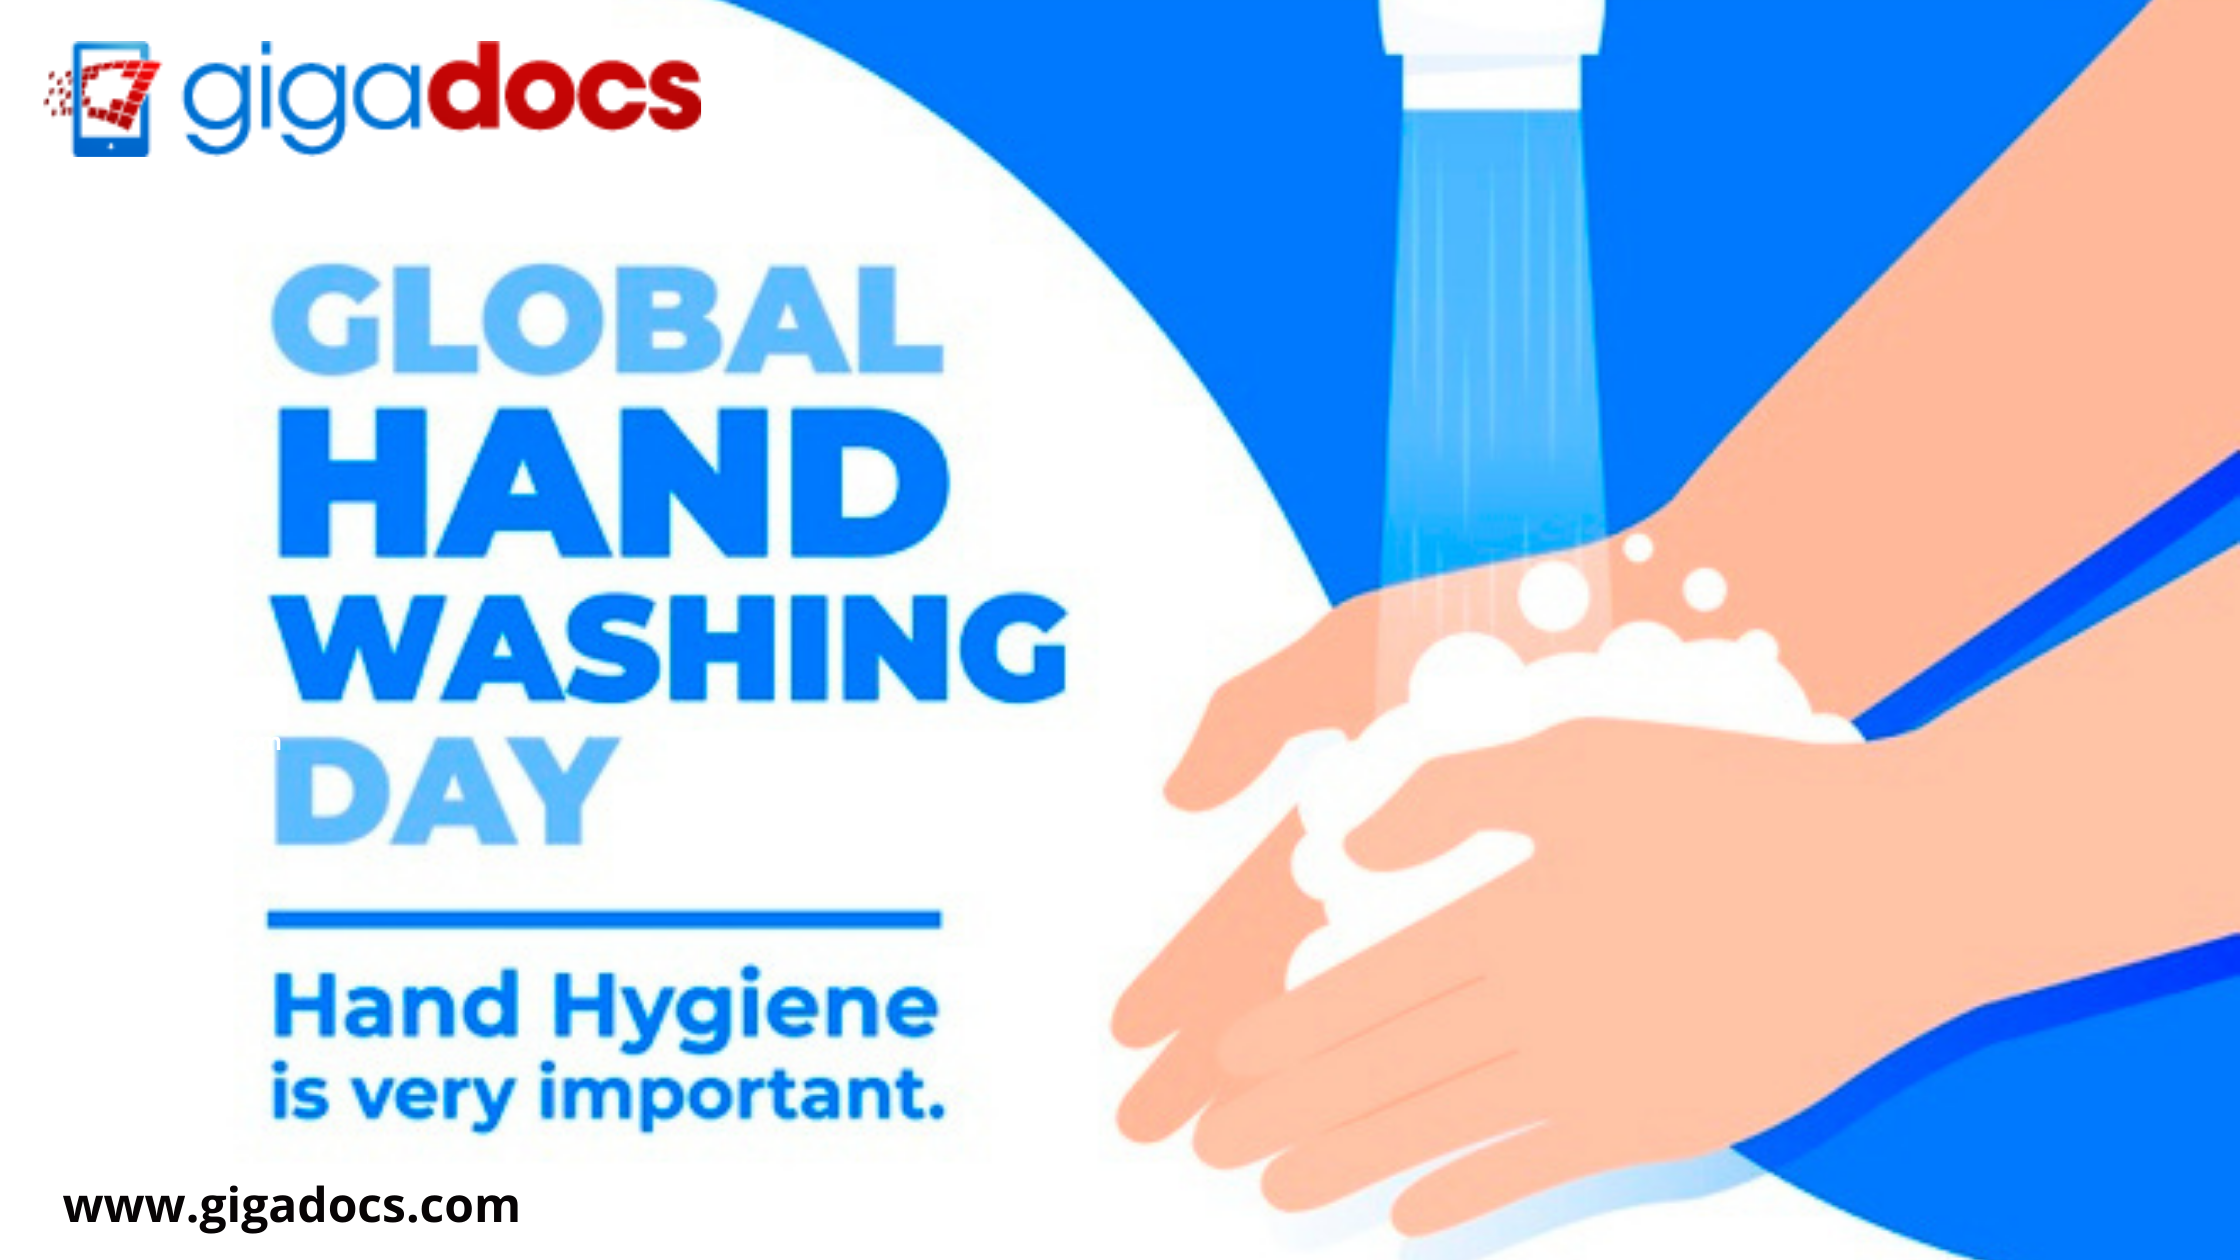 How to Choose the Best Hand Wash this Global Hand Washing Day?